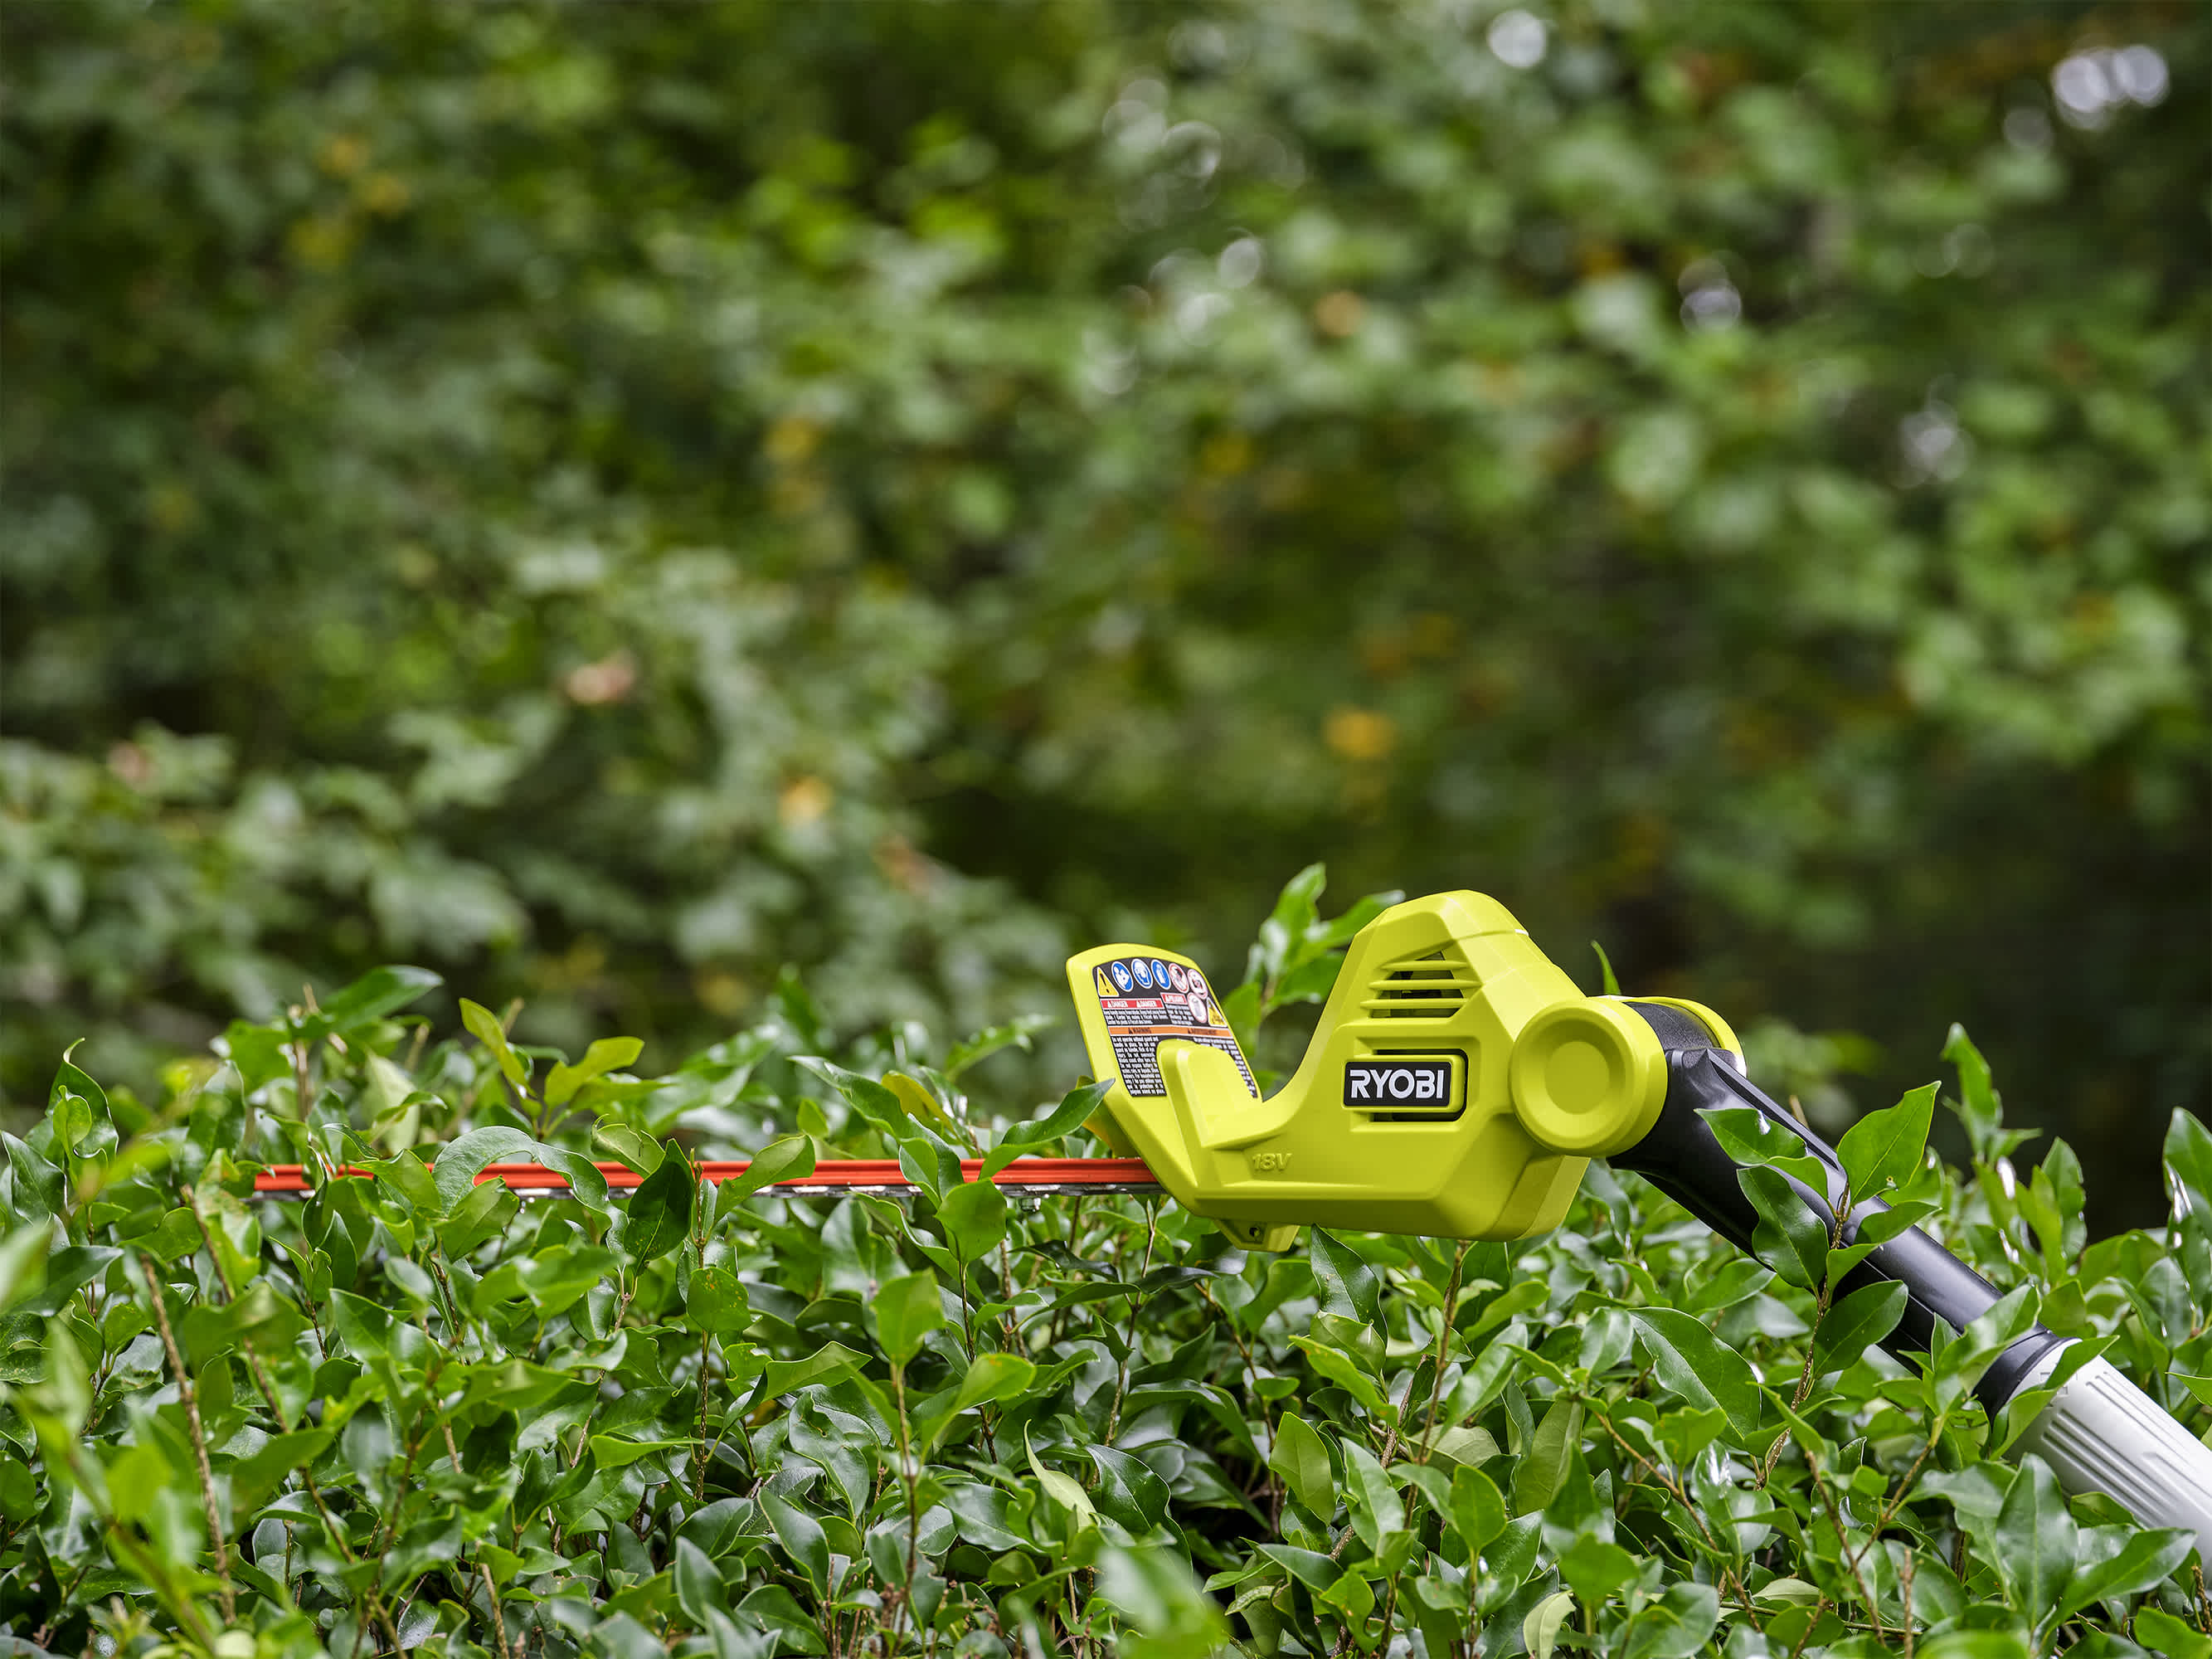 Product Features Image for 18V ONE+ 18" POLE HEDGE TRIMMER KIT.